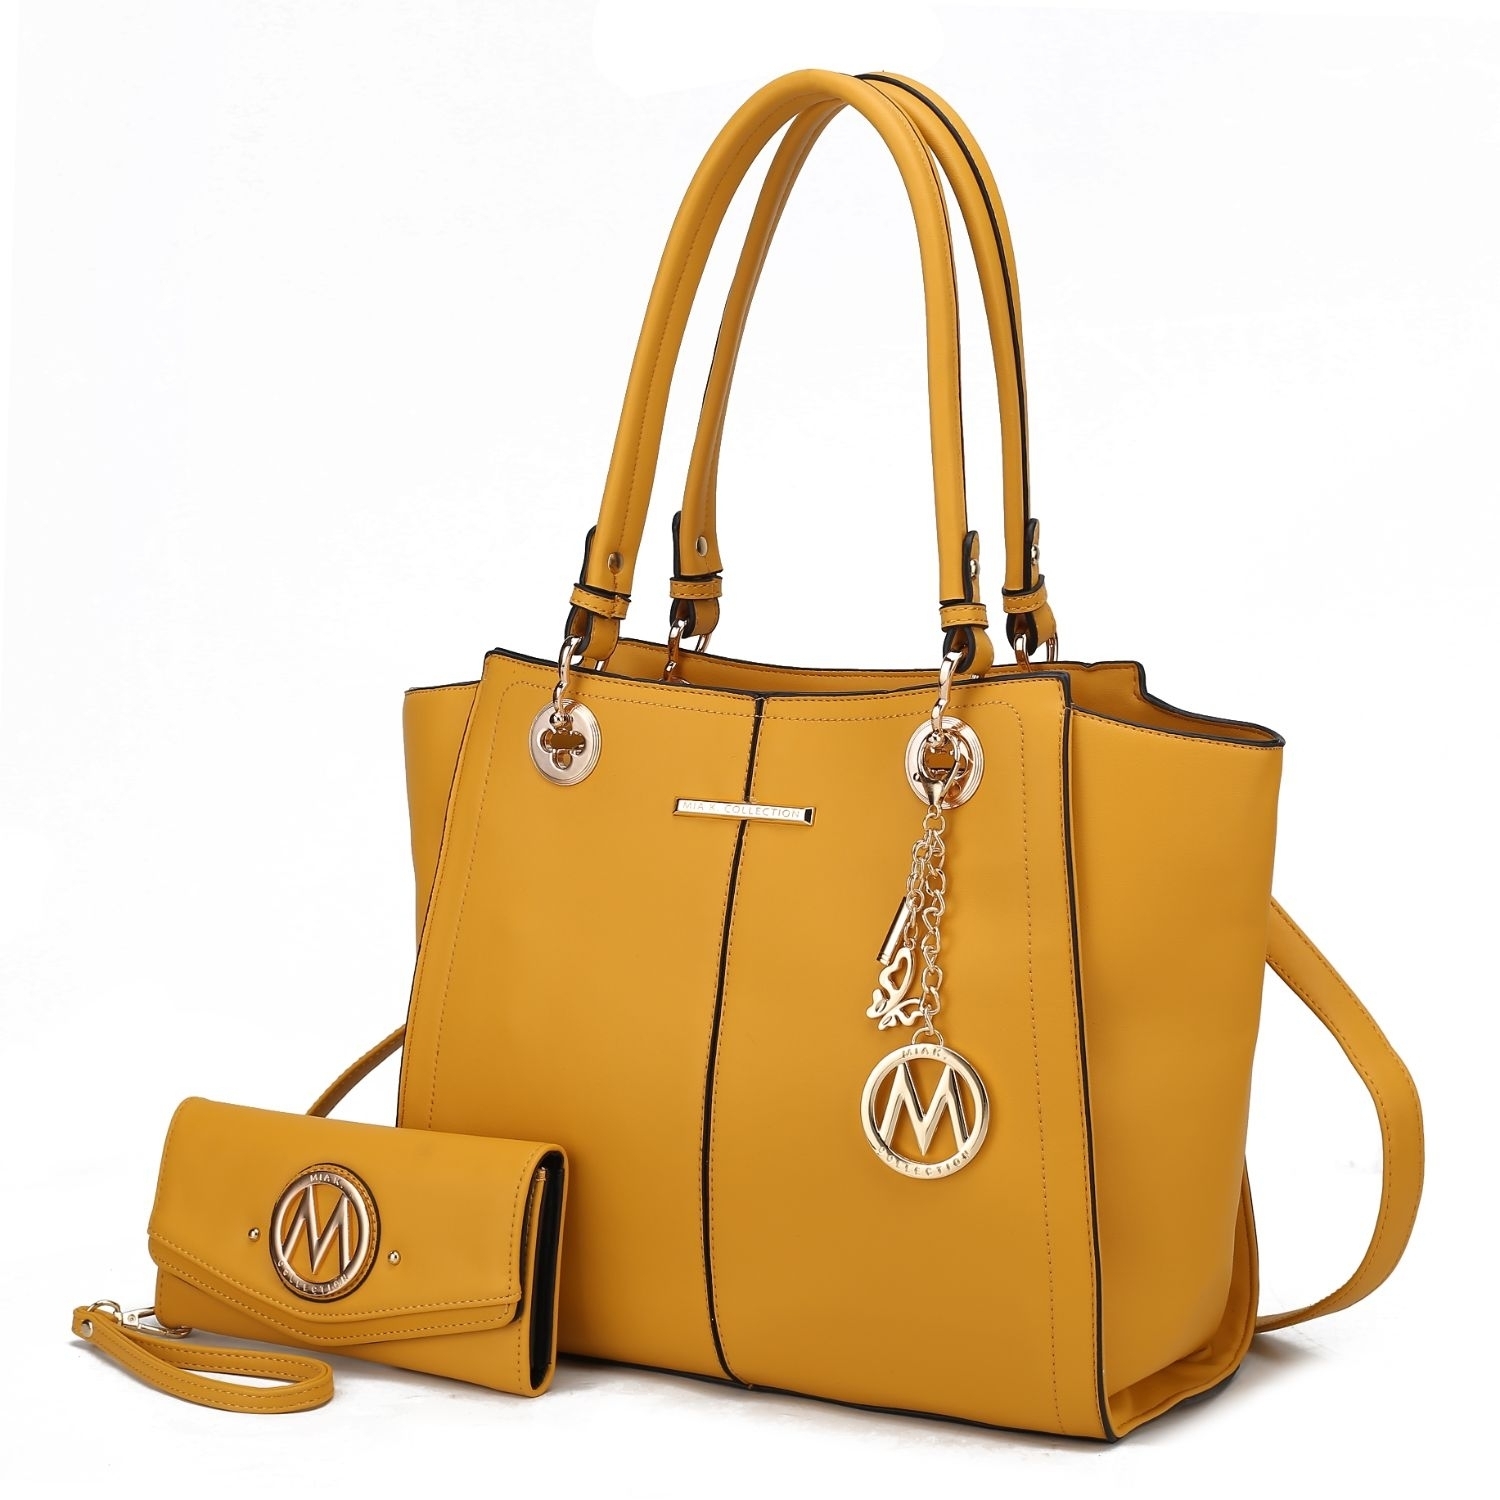 MKF Collection Ivy Vegan Leather Women's Tote Handbag By Mia K With Wallet -2 Pieces - Yellow